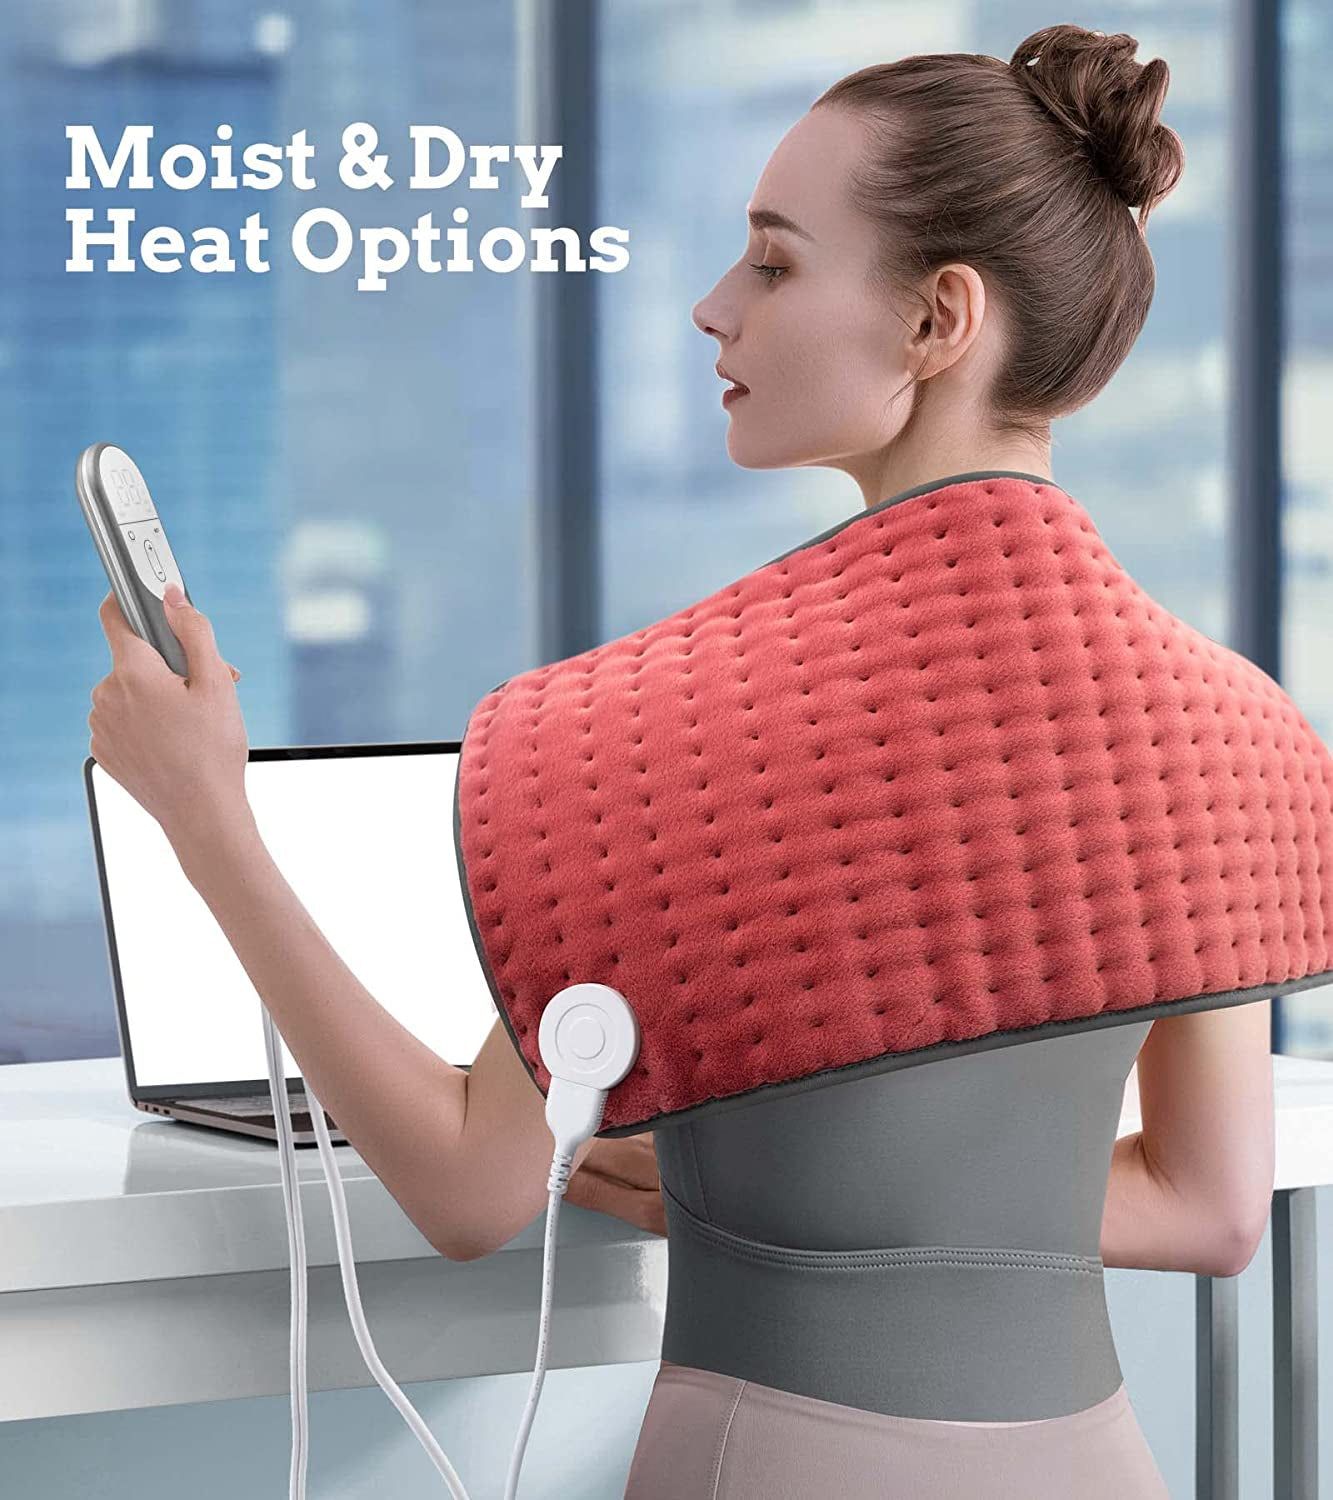 Heating Pad for Back, Neck, Shoulder, Abdomen, Knee and Leg Pain Relief, Mothers Day Gifts for Women, Men, Dad, Mom, Auto-Off,Machine Washable,Moist Dry Heat Options,Extra Large 12"X24"